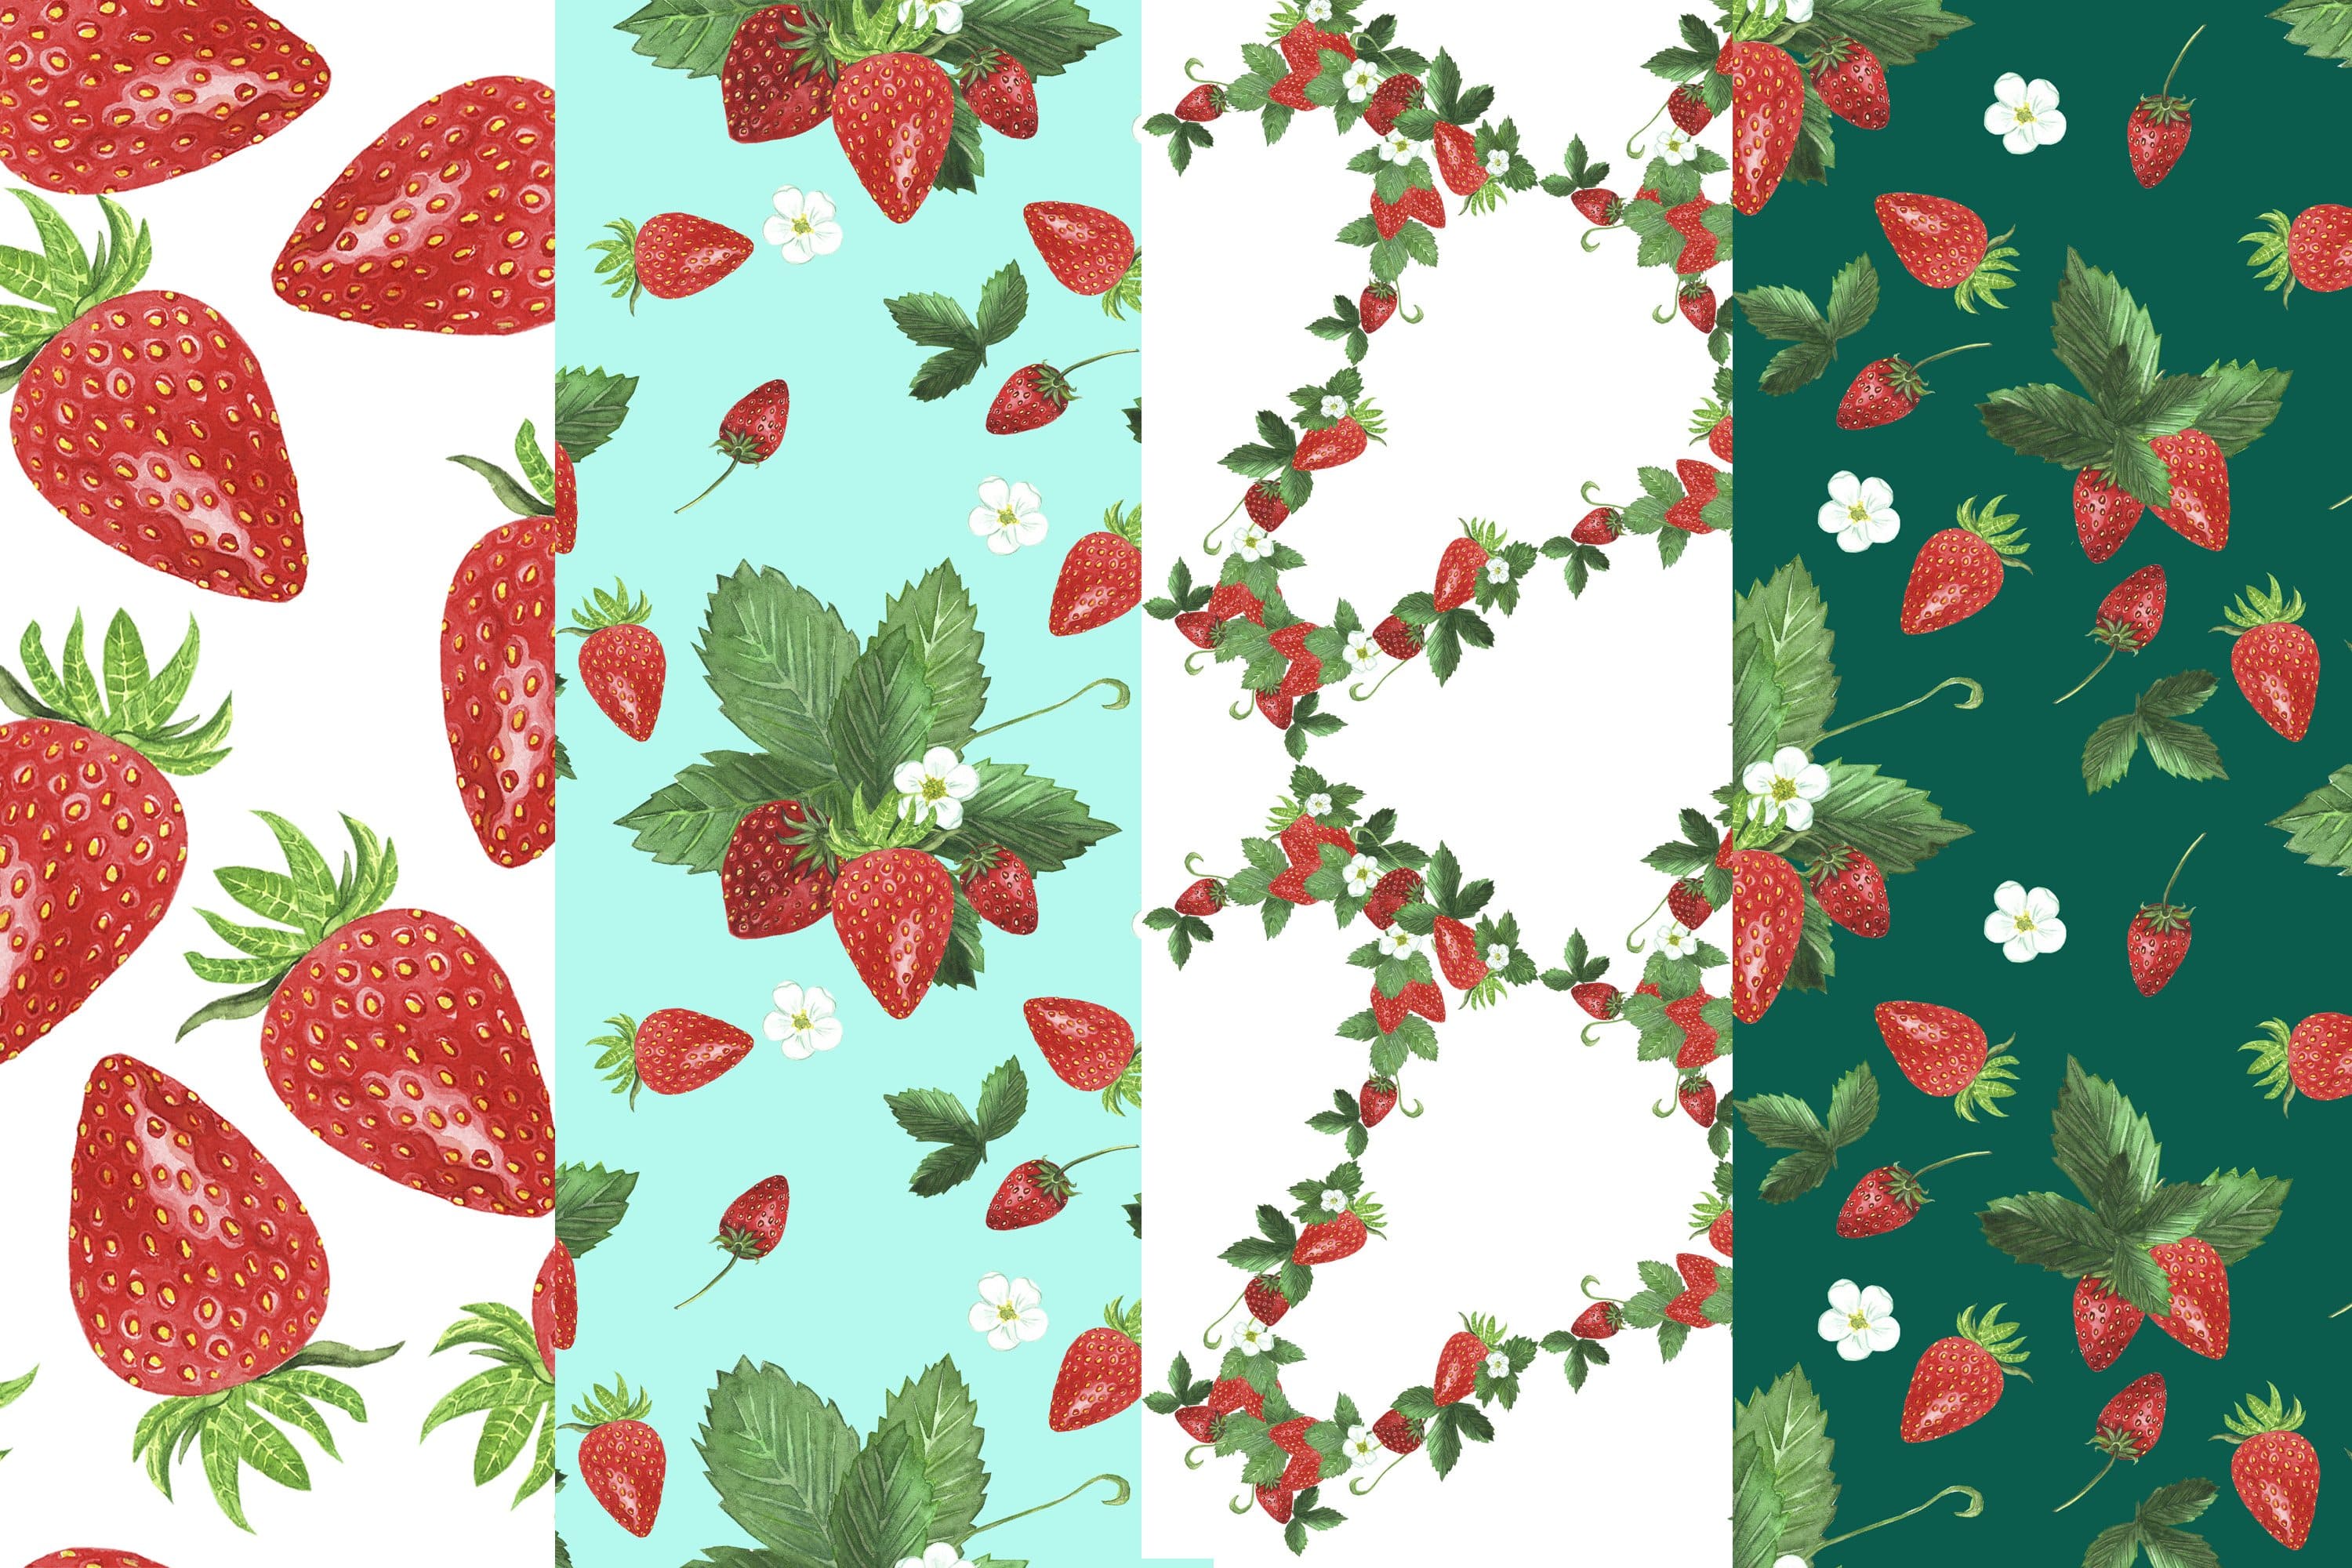 Color patterns with the image of strawberries in different compositions.